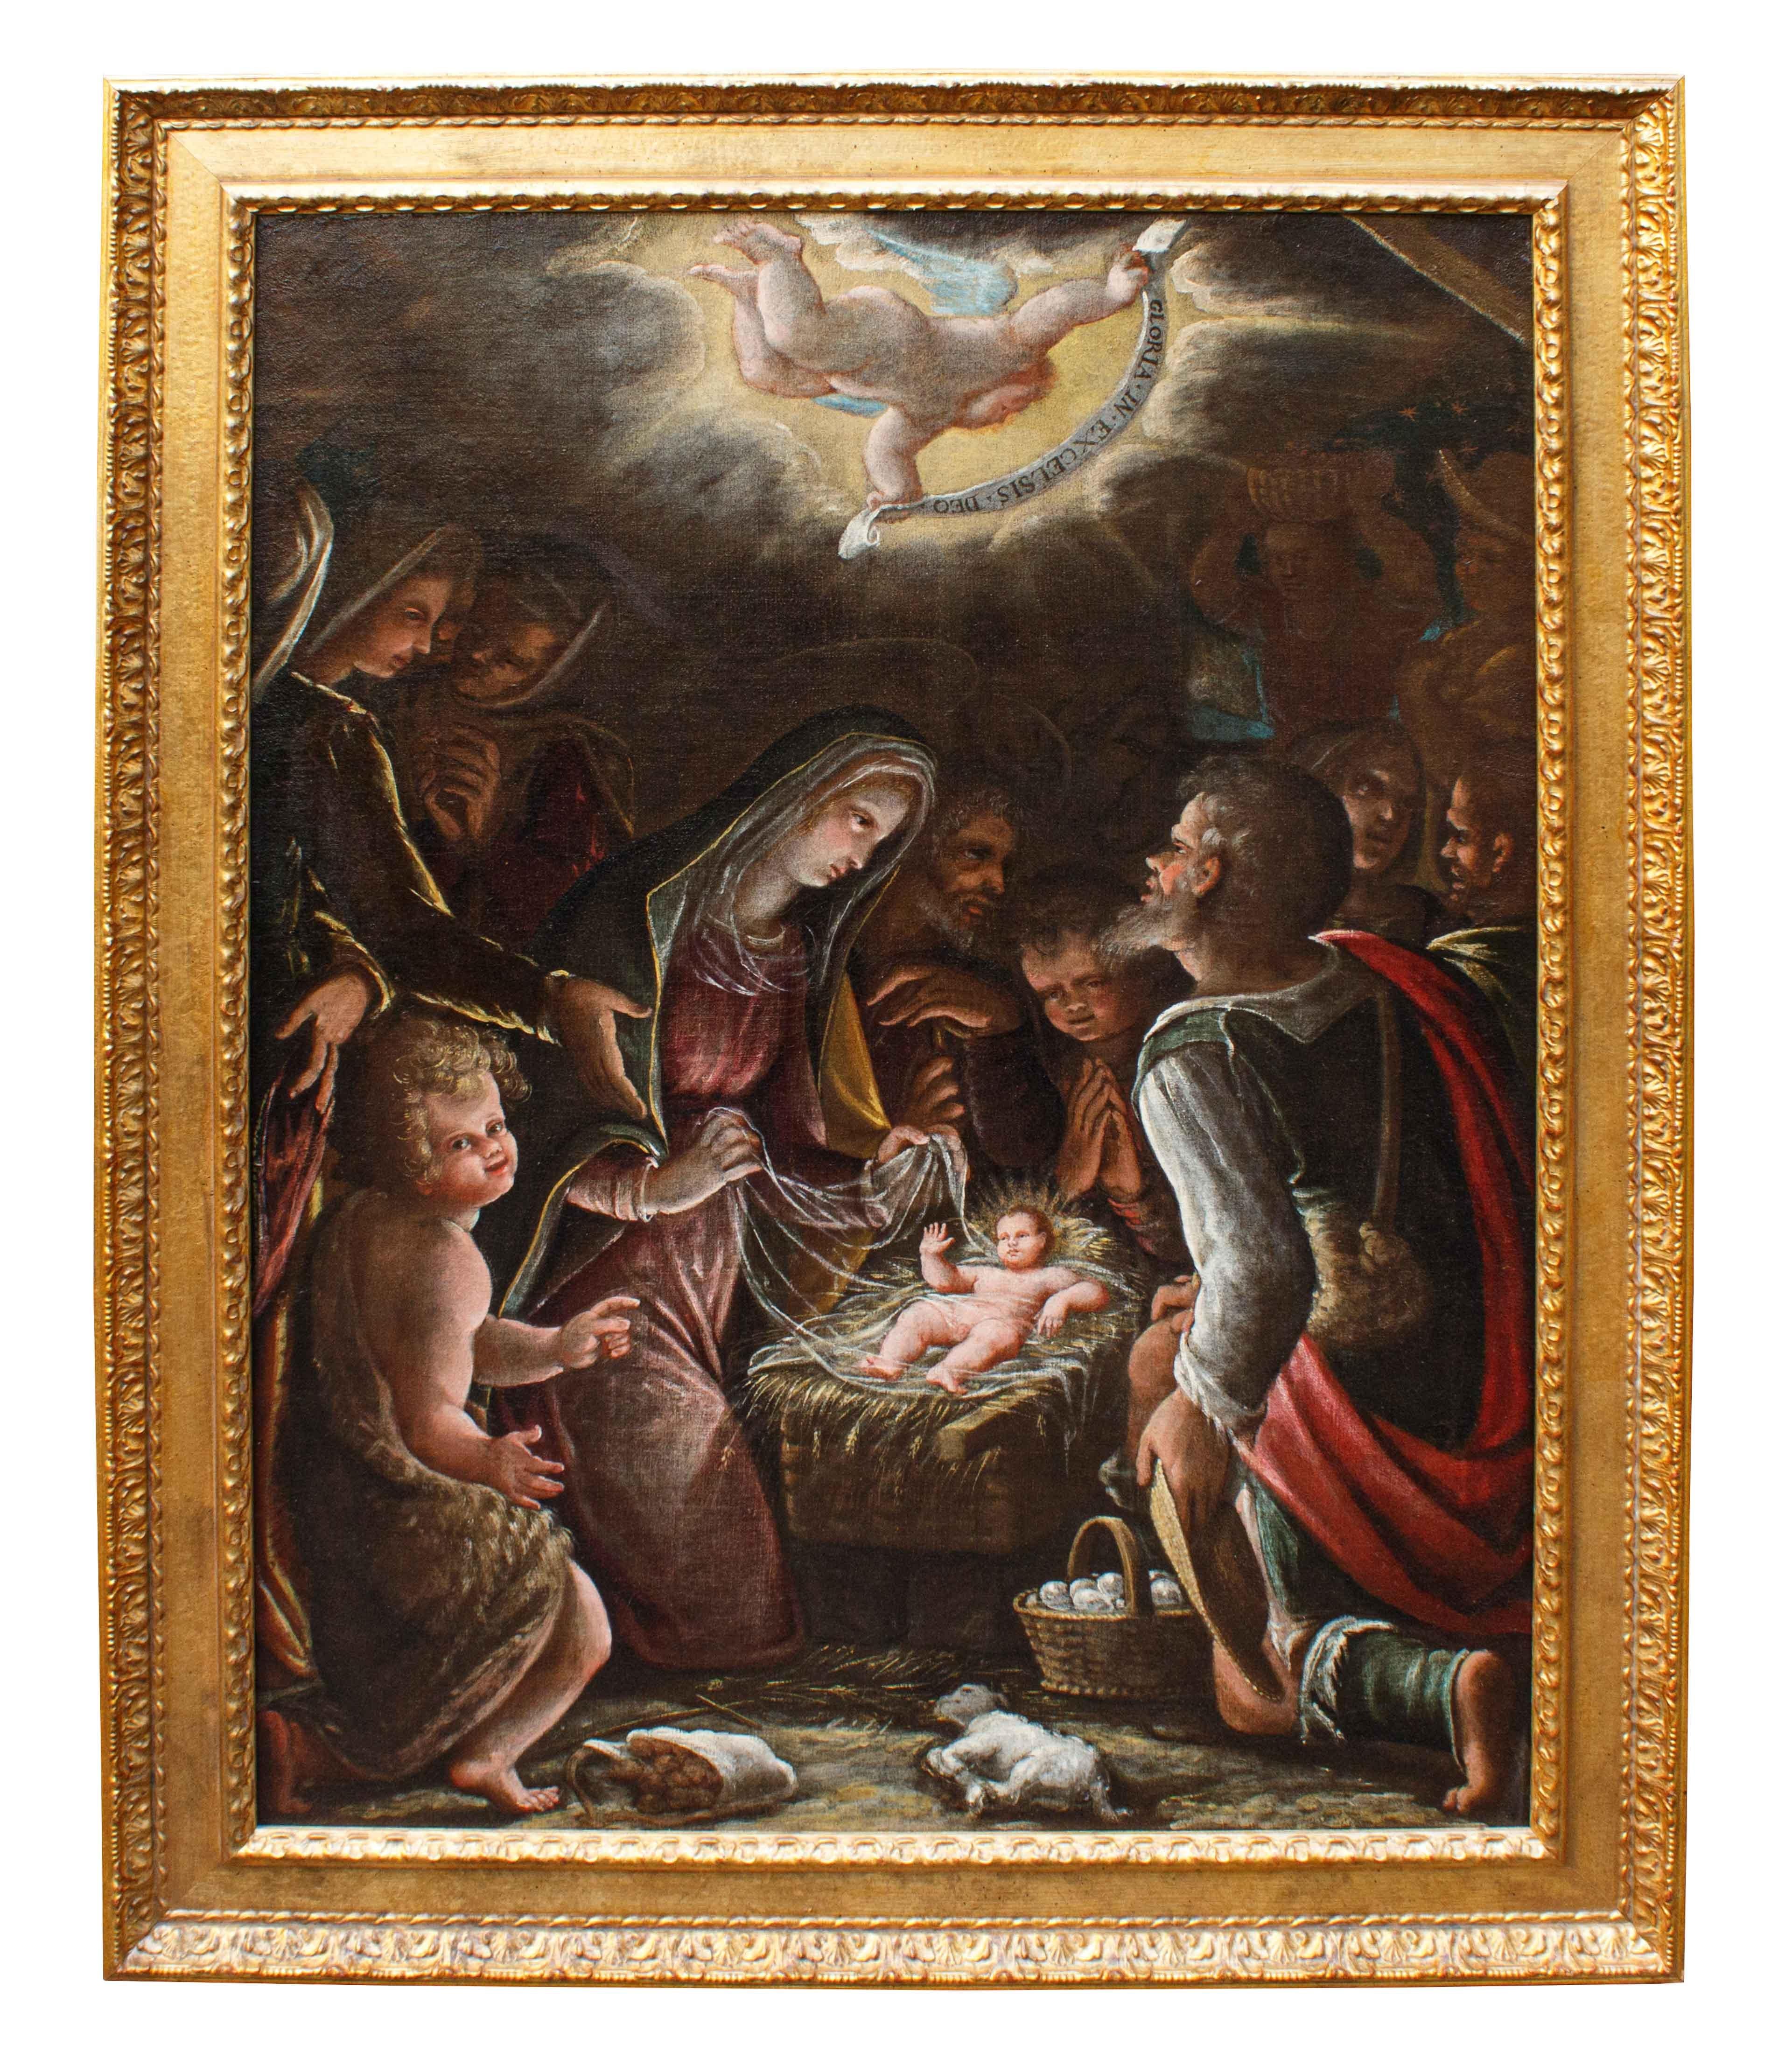 Luca Cattapane (Cremona, 1597-1620), attr.

Adoration of the Shepherds

Oil on canvas, 110 x 90 cm - with frame 129 x 101 cm

Ascribed to the Lombard school of the late 16th century, the painting more accurately exhibits Cremonese characteristics: